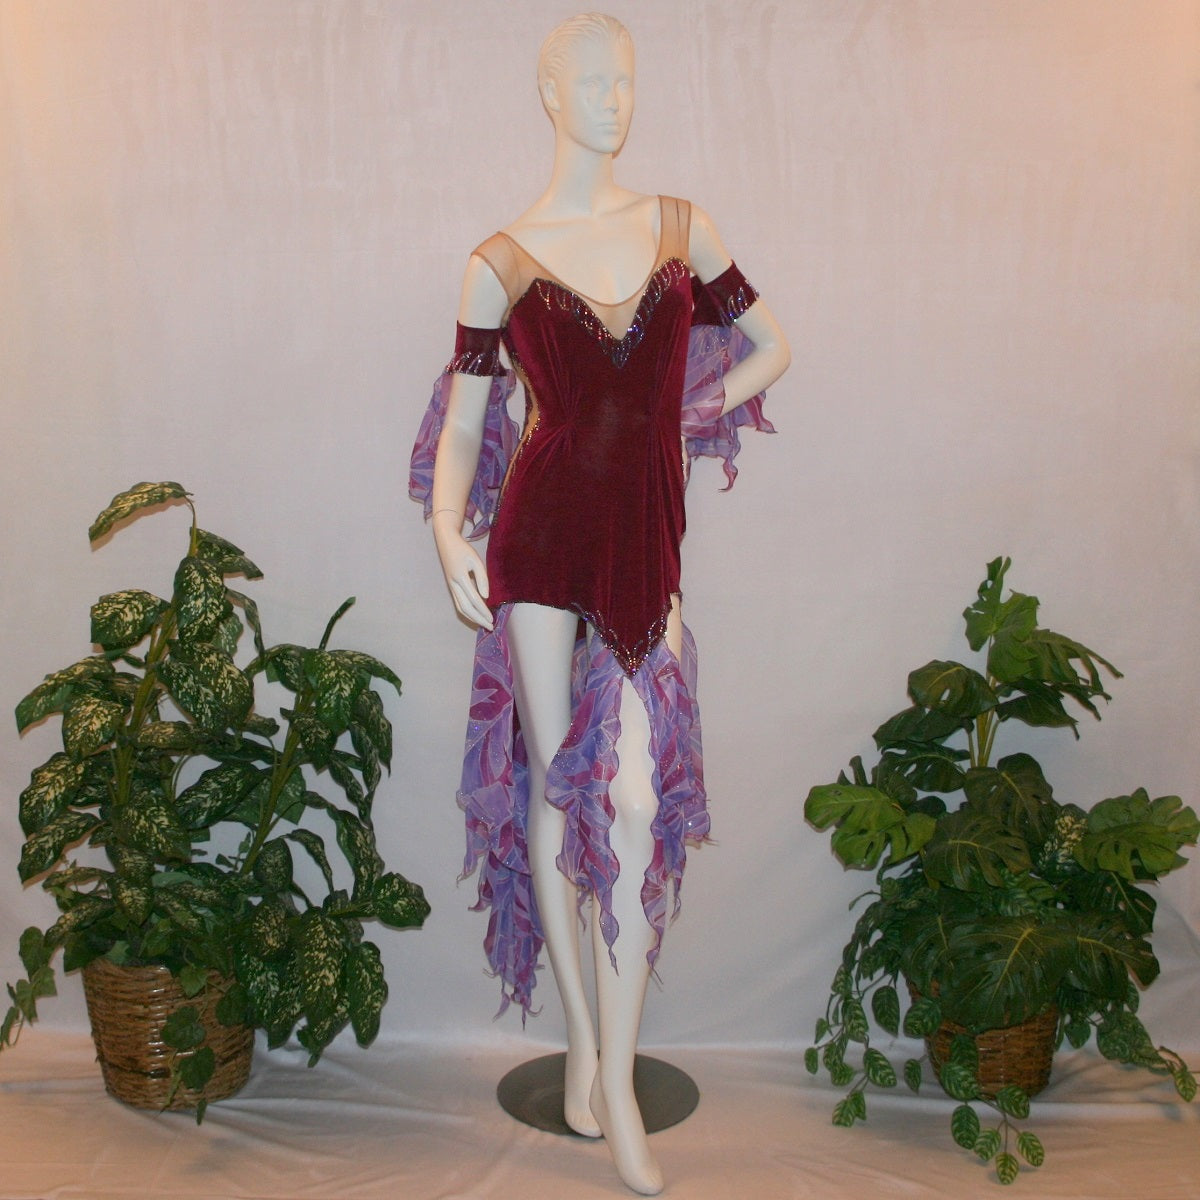 Crystal's Creations Latin-rhythm dress portion of Magenta converta ballroom dress created of magenta solid slinky on a nude illusion base with tropical chiffon print skirtings of magenta & orchids, is embellished with tanzanite & orchid rhinestone work.